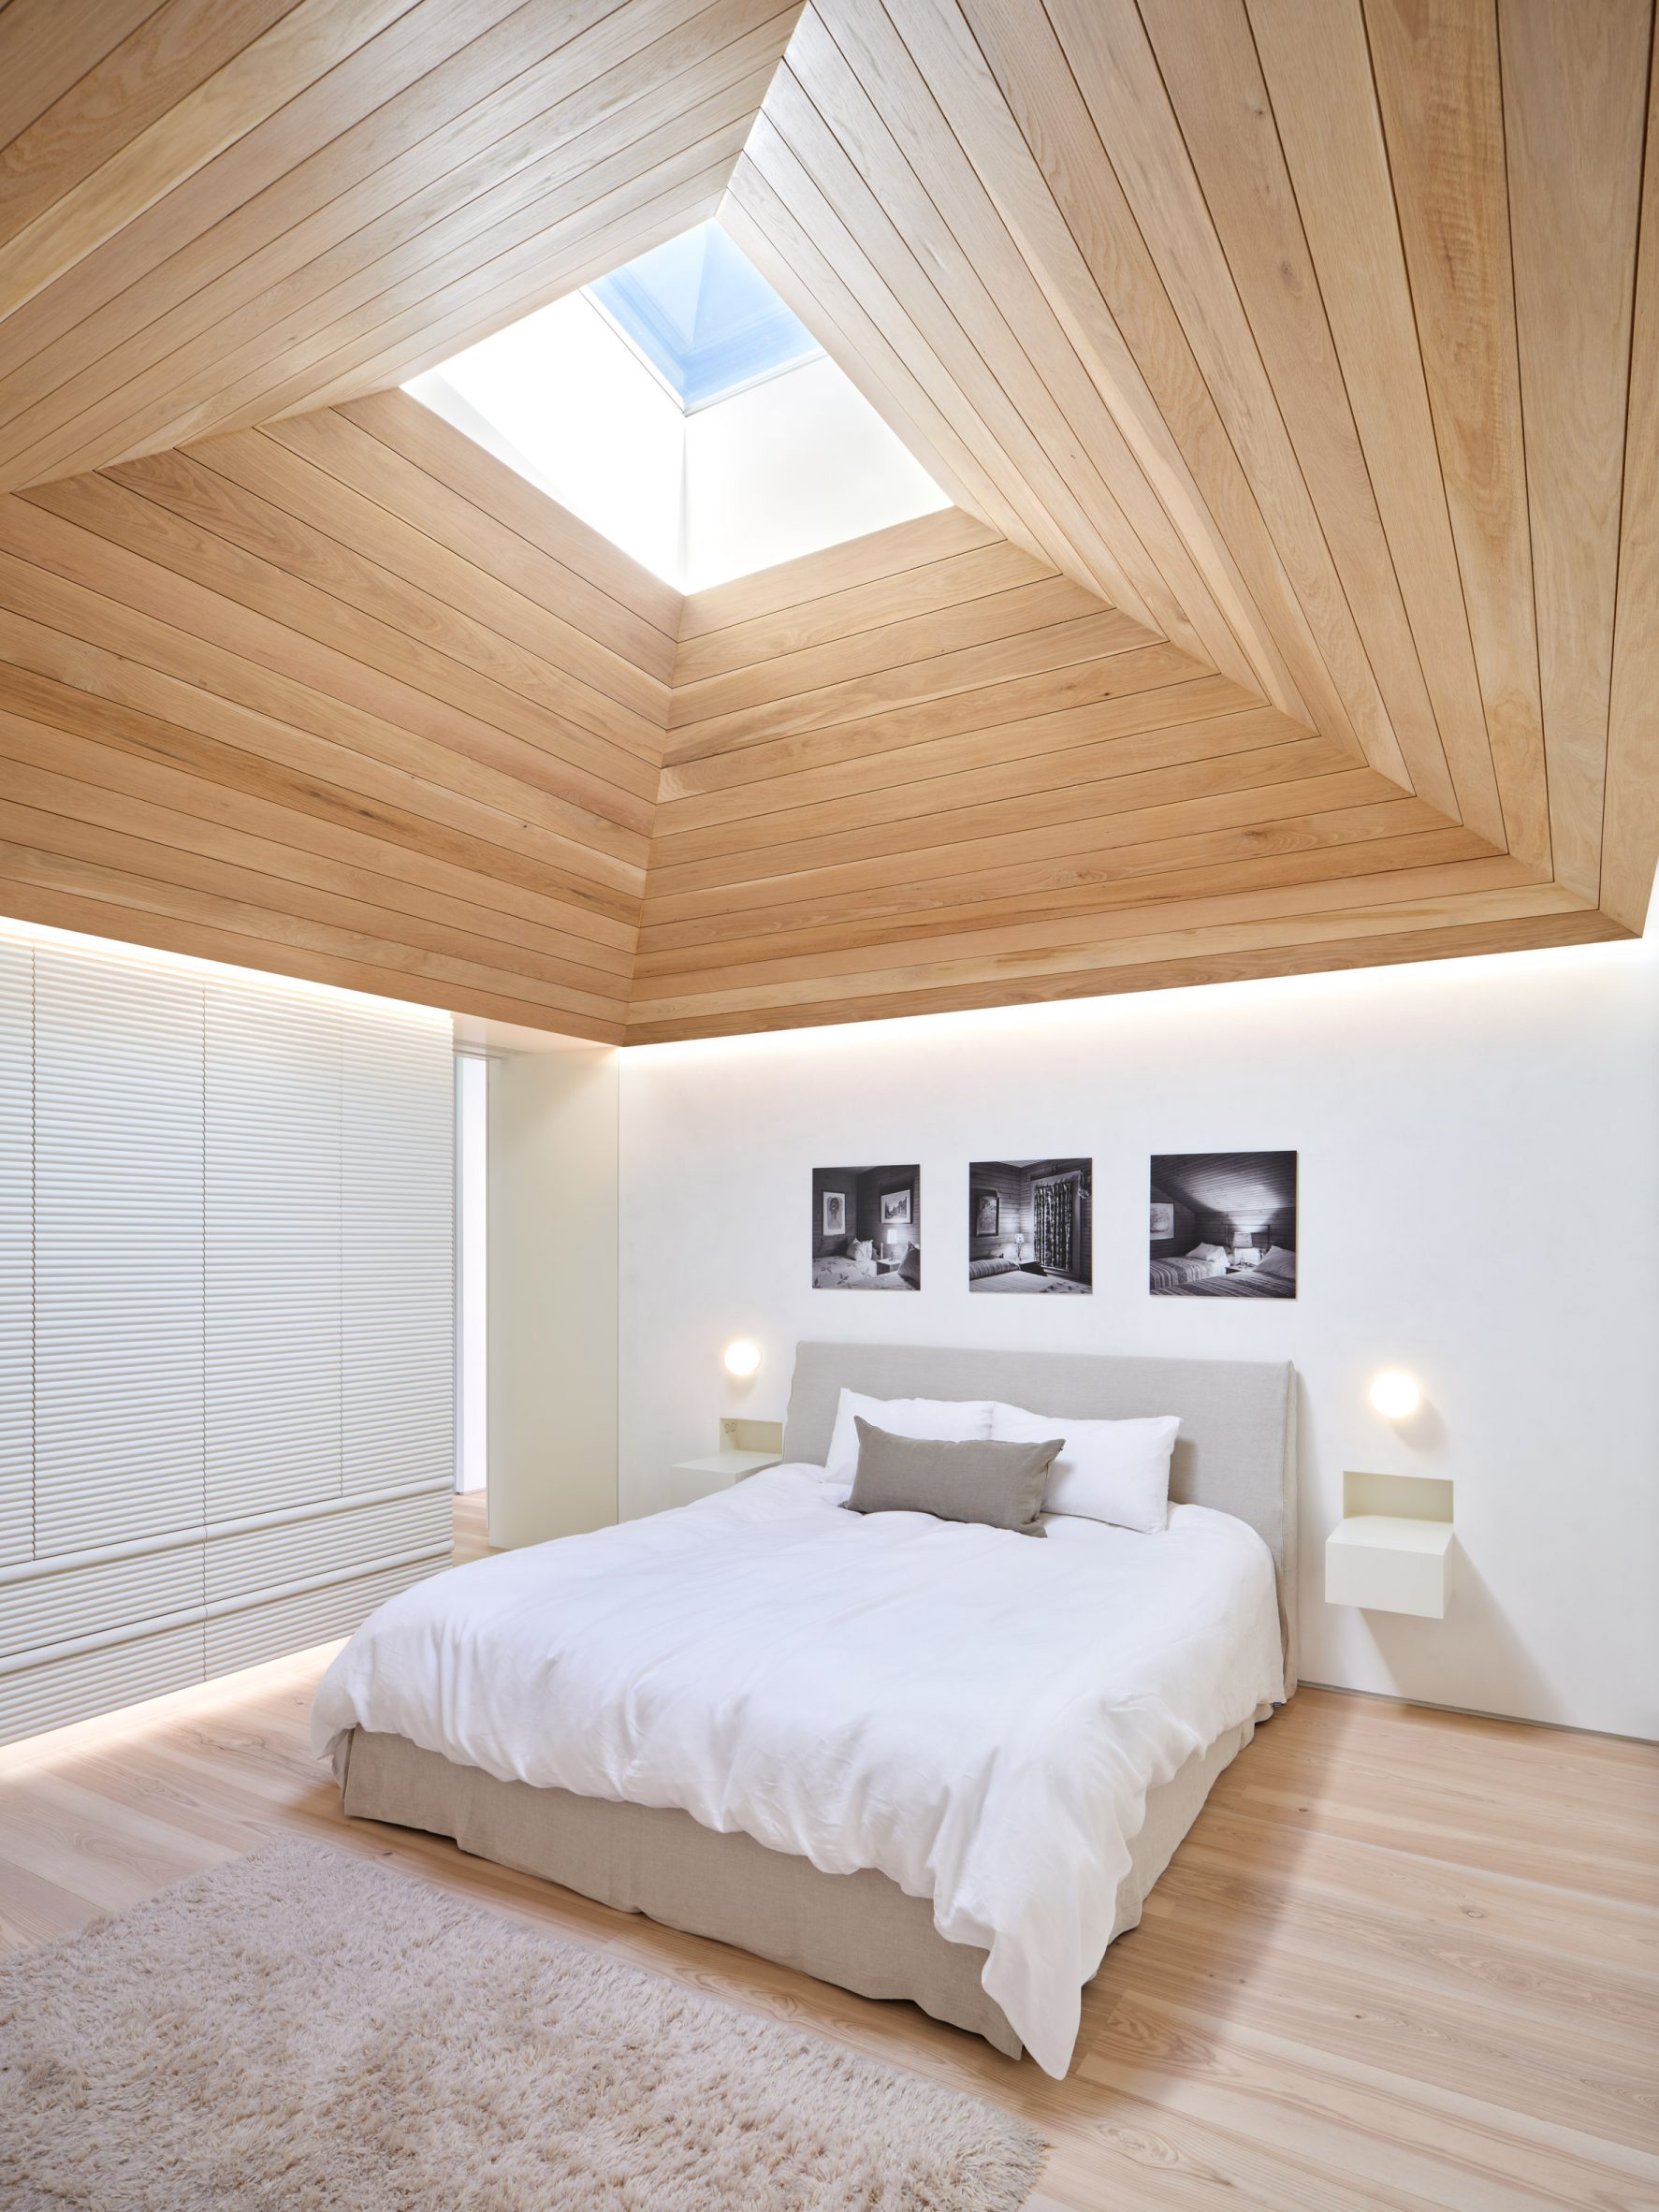 Central bedroom with skylight